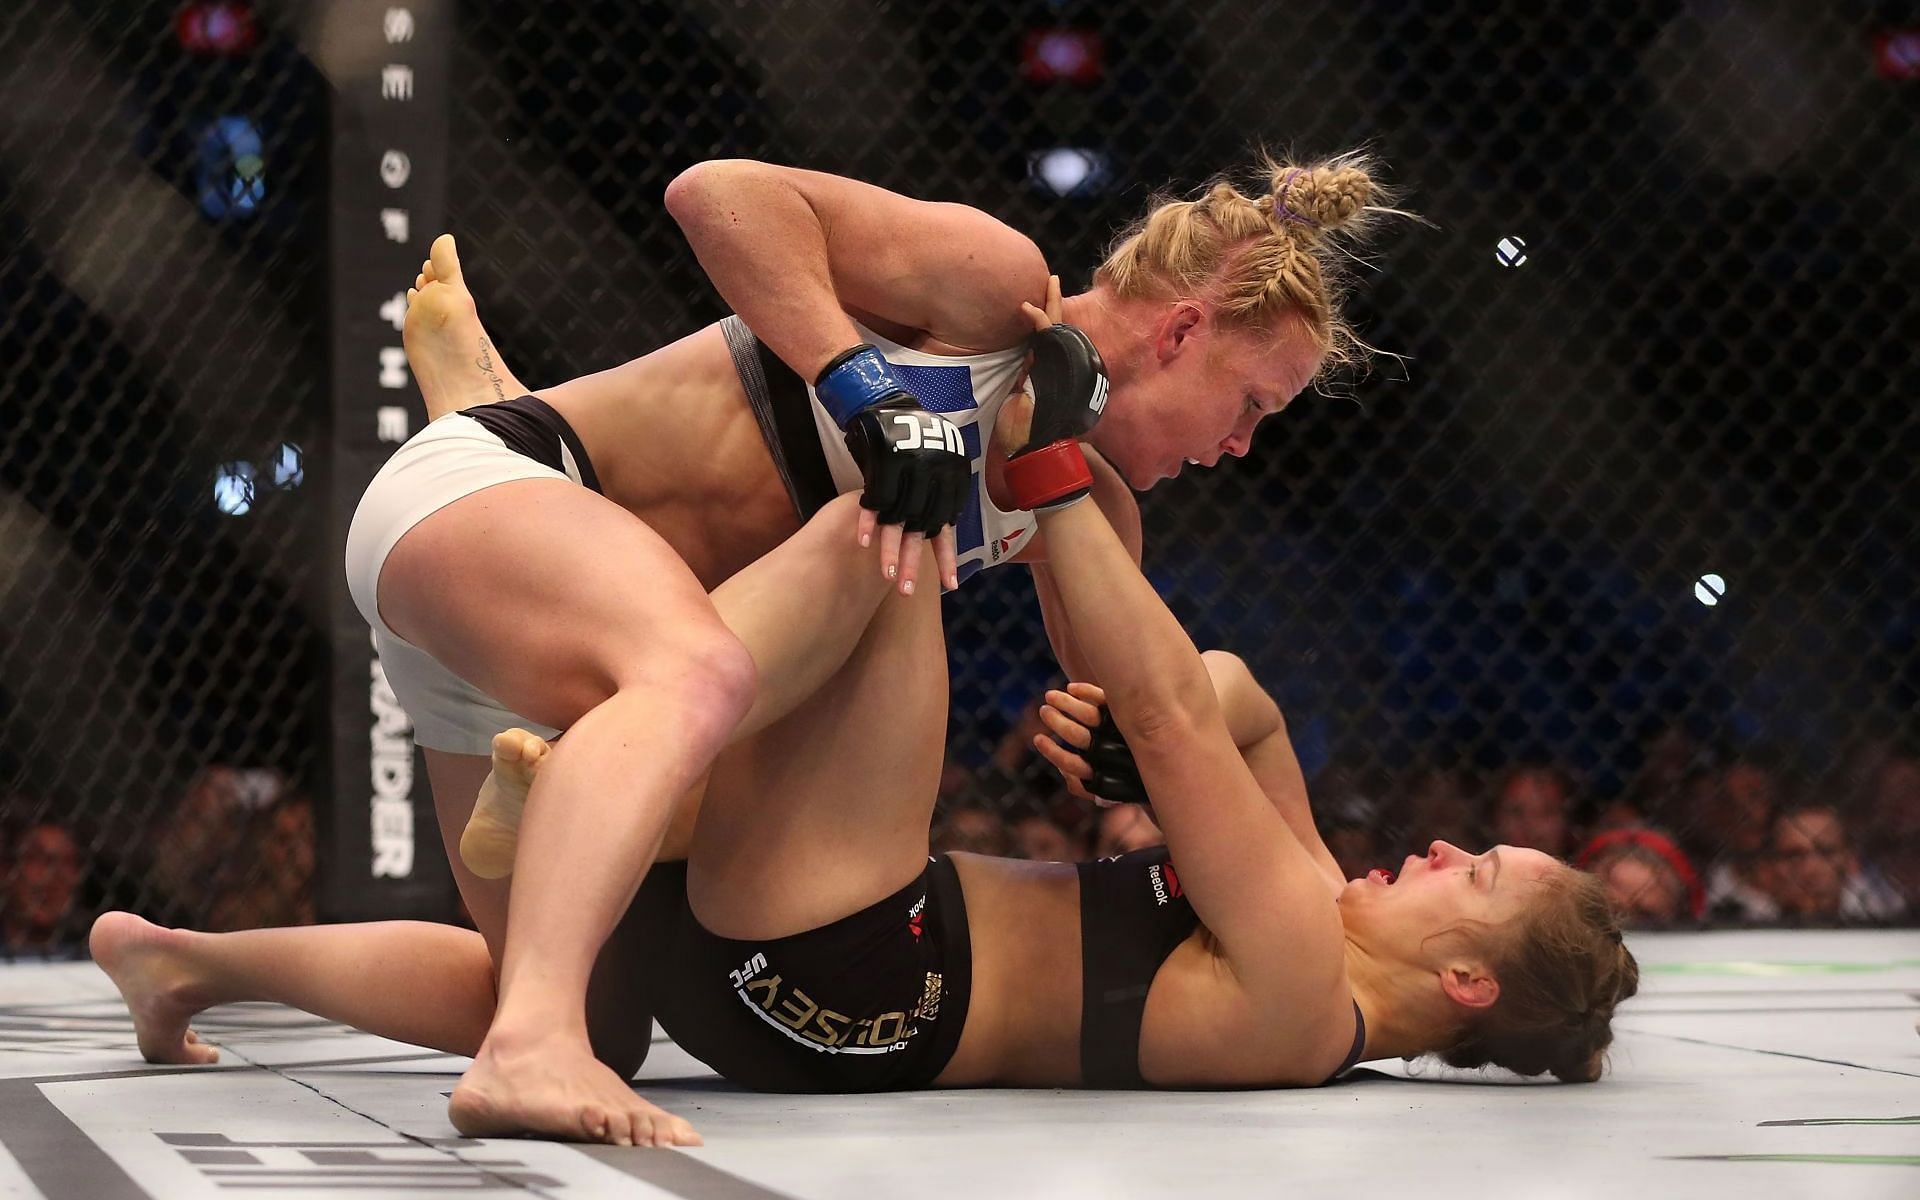 Holly Holm is still living off her finish of Ronda Rousey in 2015